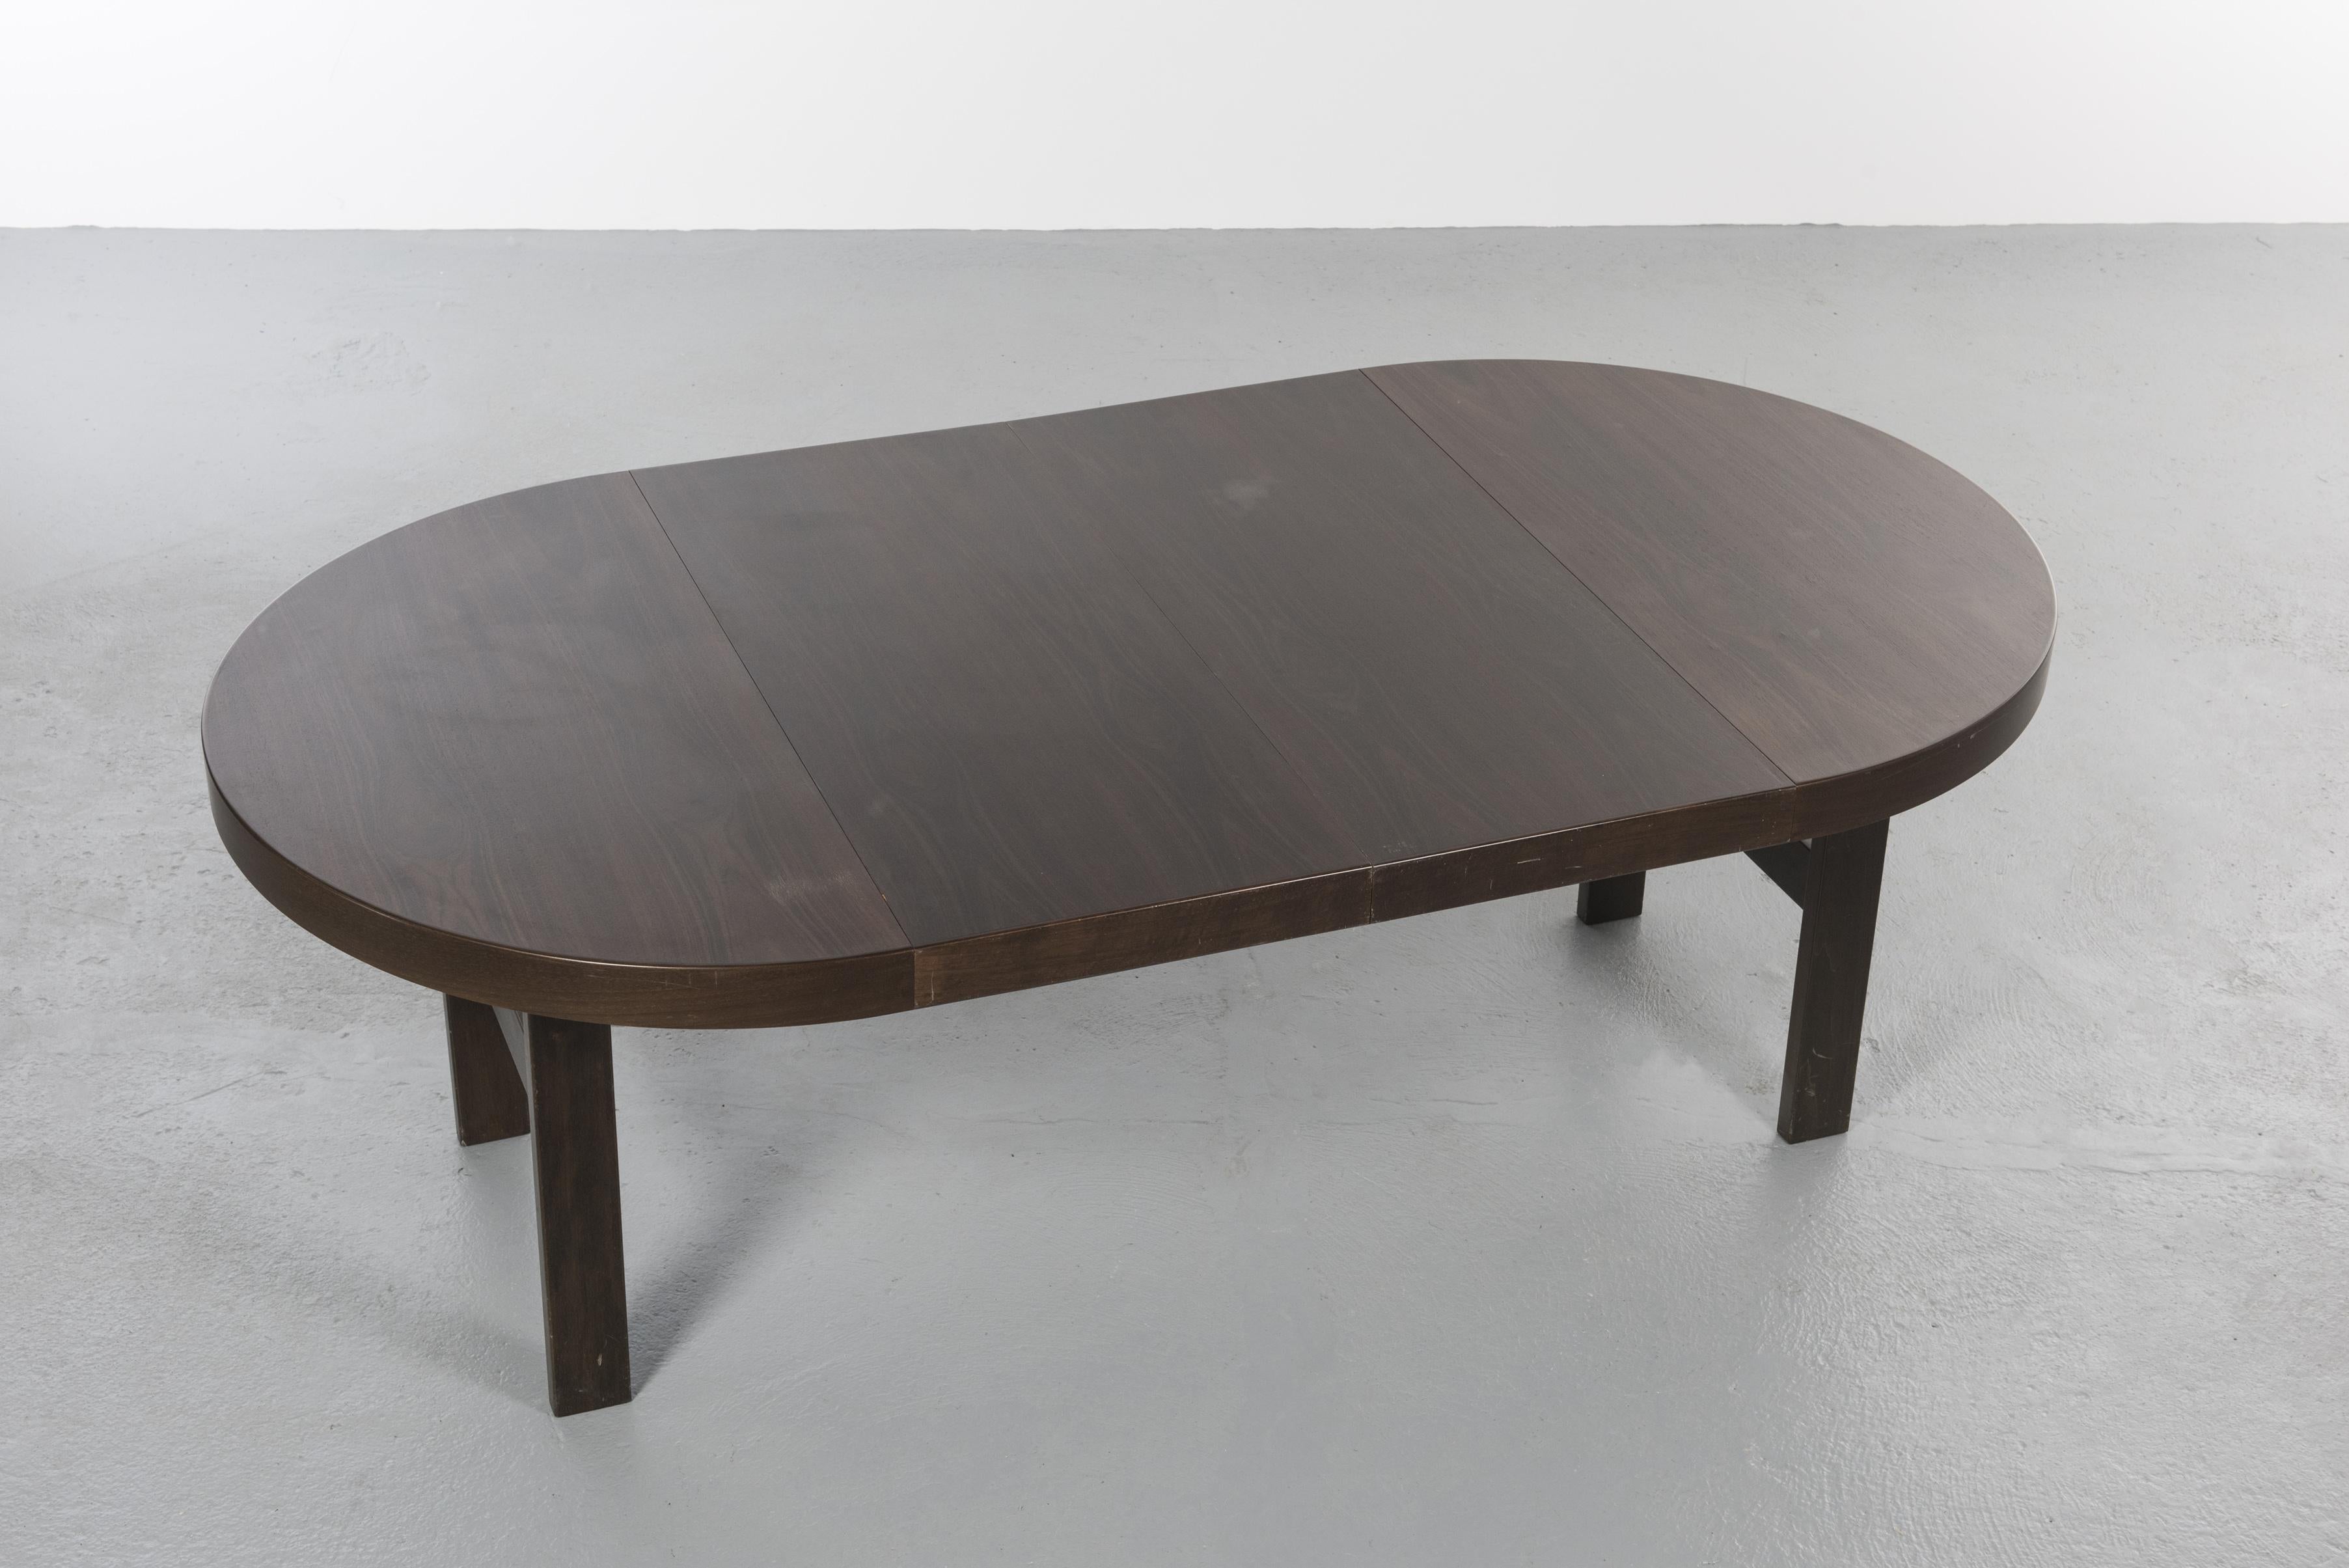 Round/Oval Table with Extension Leaves in Veneered Oak, Black Stained, 1960s For Sale 3